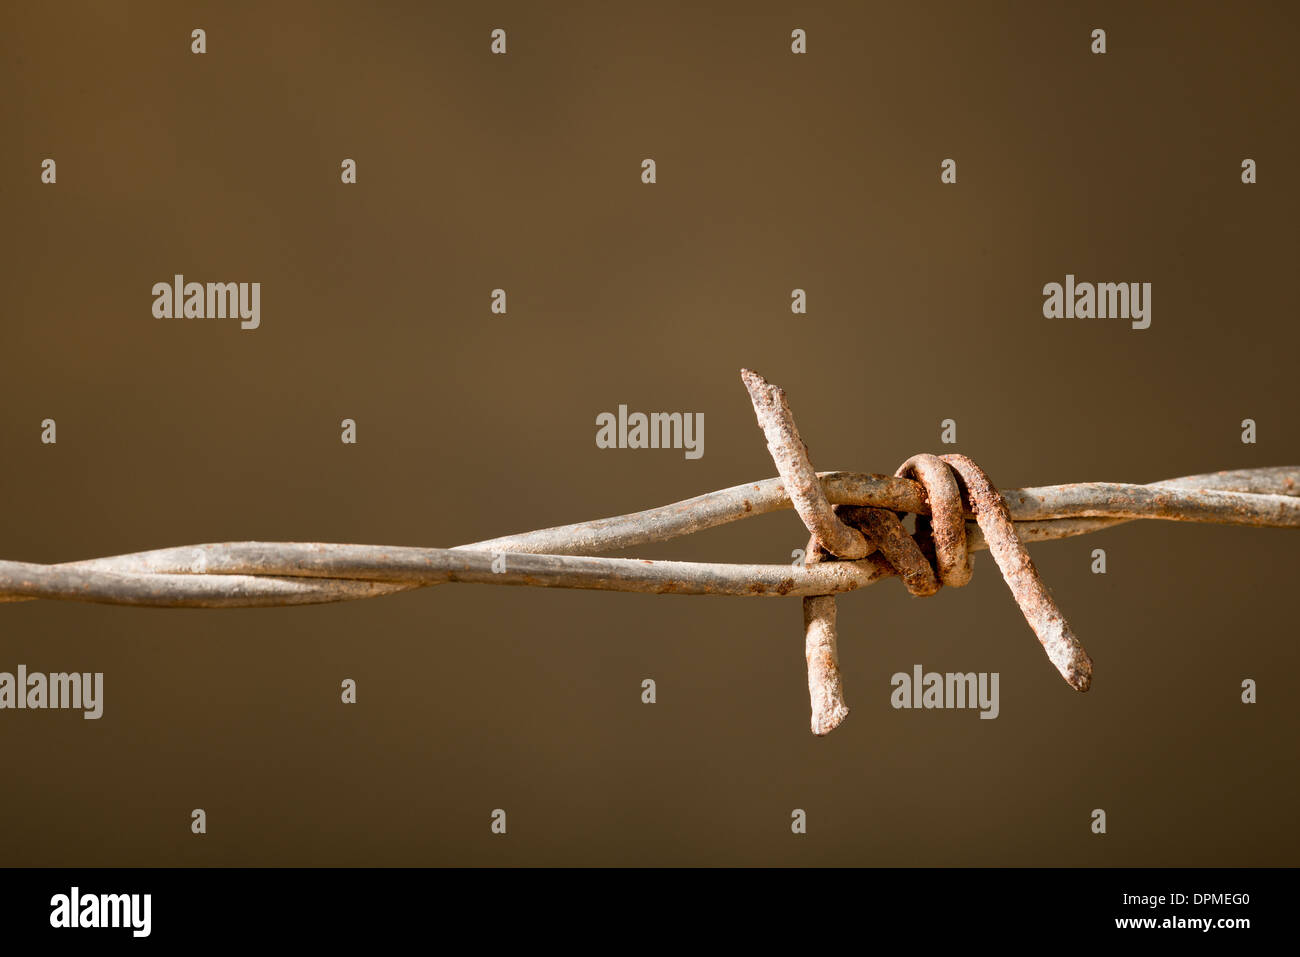 rusty barbed wire on the dark background Stock Photo